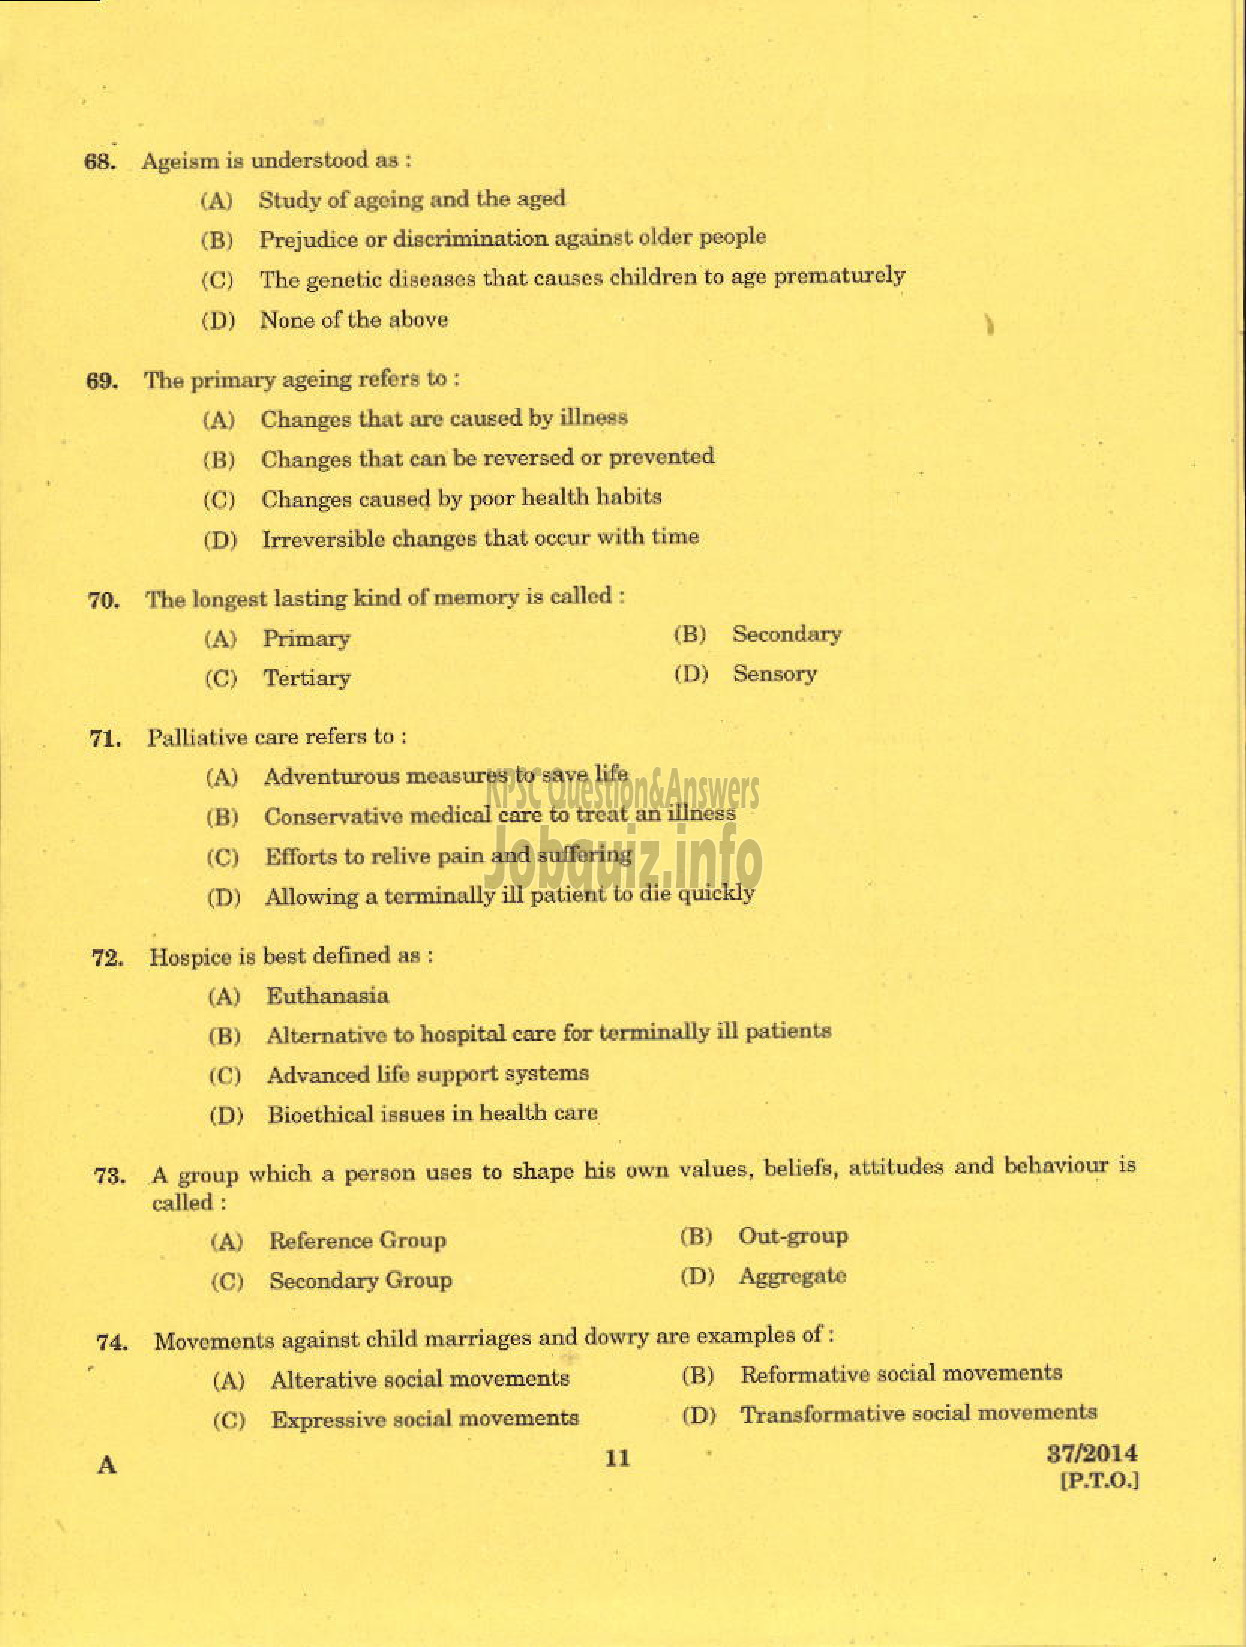 Kerala PSC Question Paper - PERSONNEL OFFICER UNITED ELECTRICAL INDUSTRIES LIMITED-9